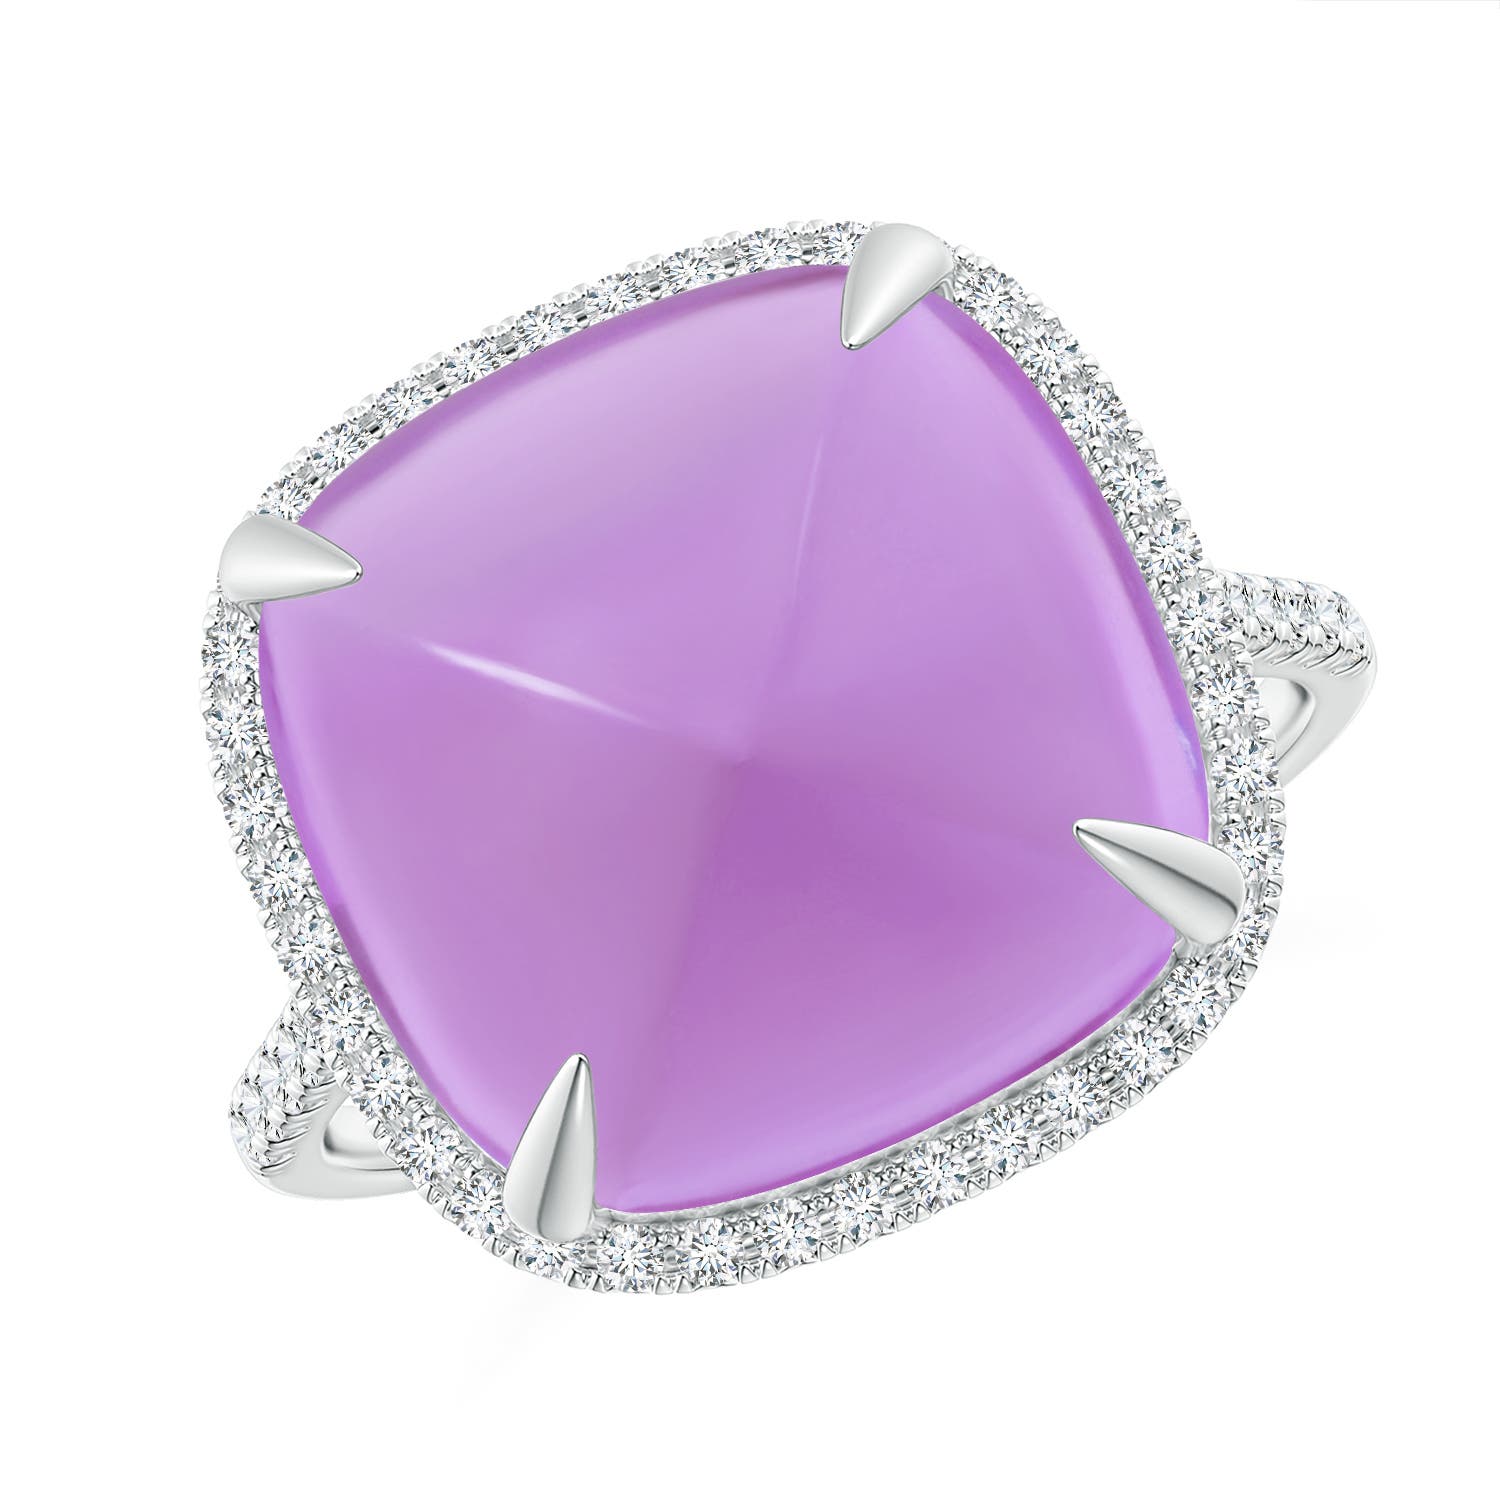 A - Amethyst / 10.34 CT / 14 KT White Gold